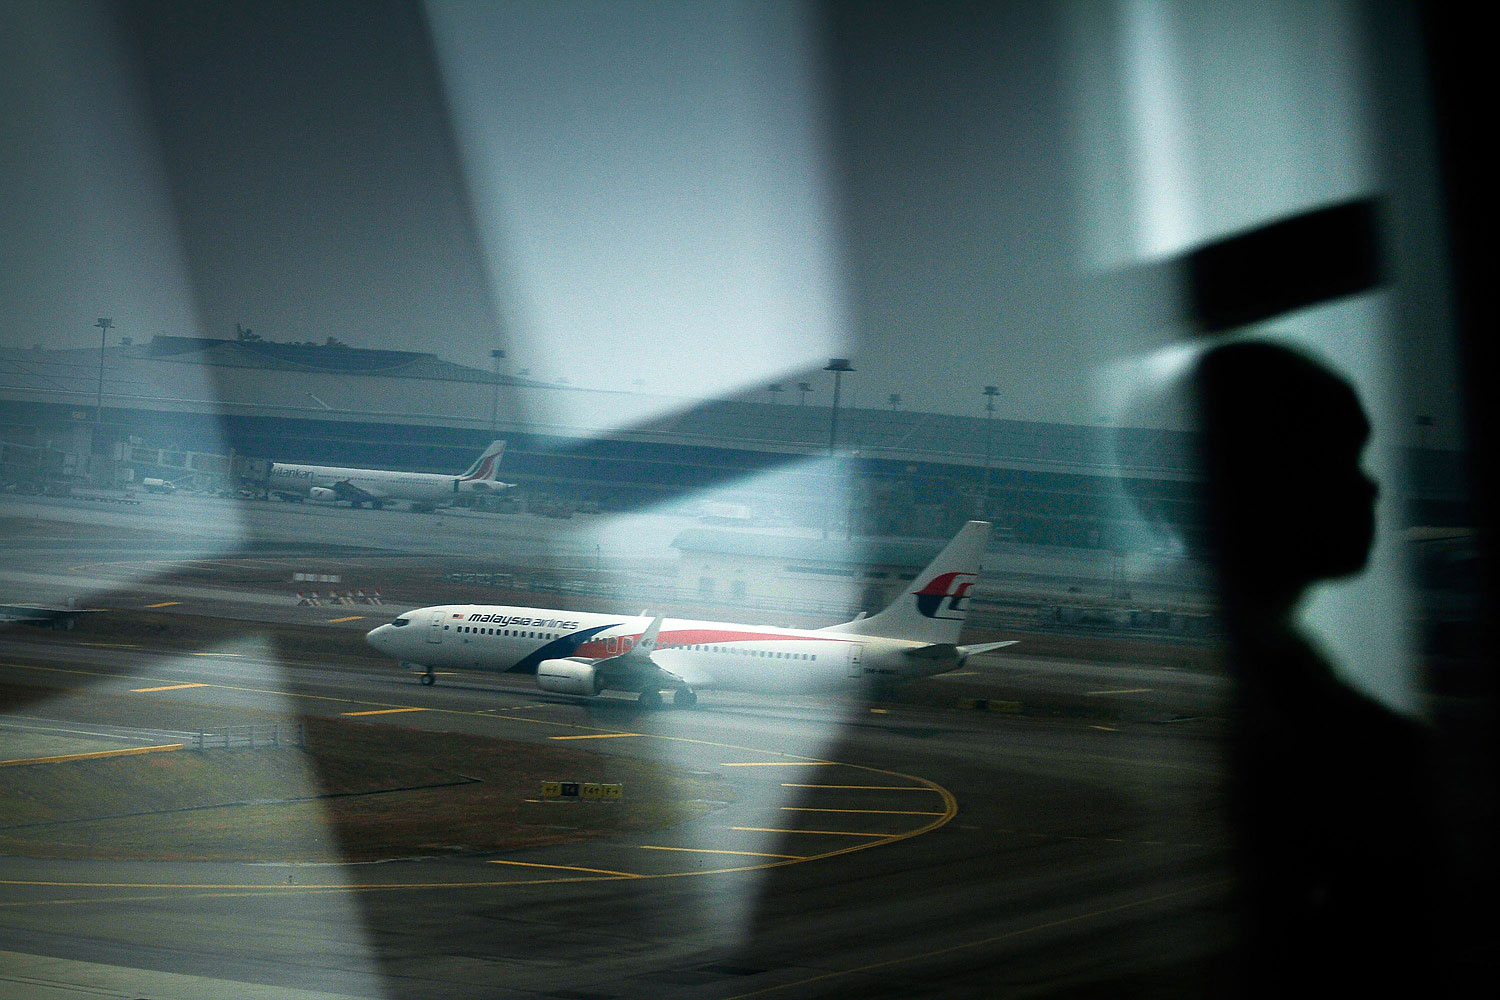 A Malaysian Airlines plane is seen on the tarmac at Kuala Lumpur International Airport on March 12, 2014 in Kuala Lumpur.